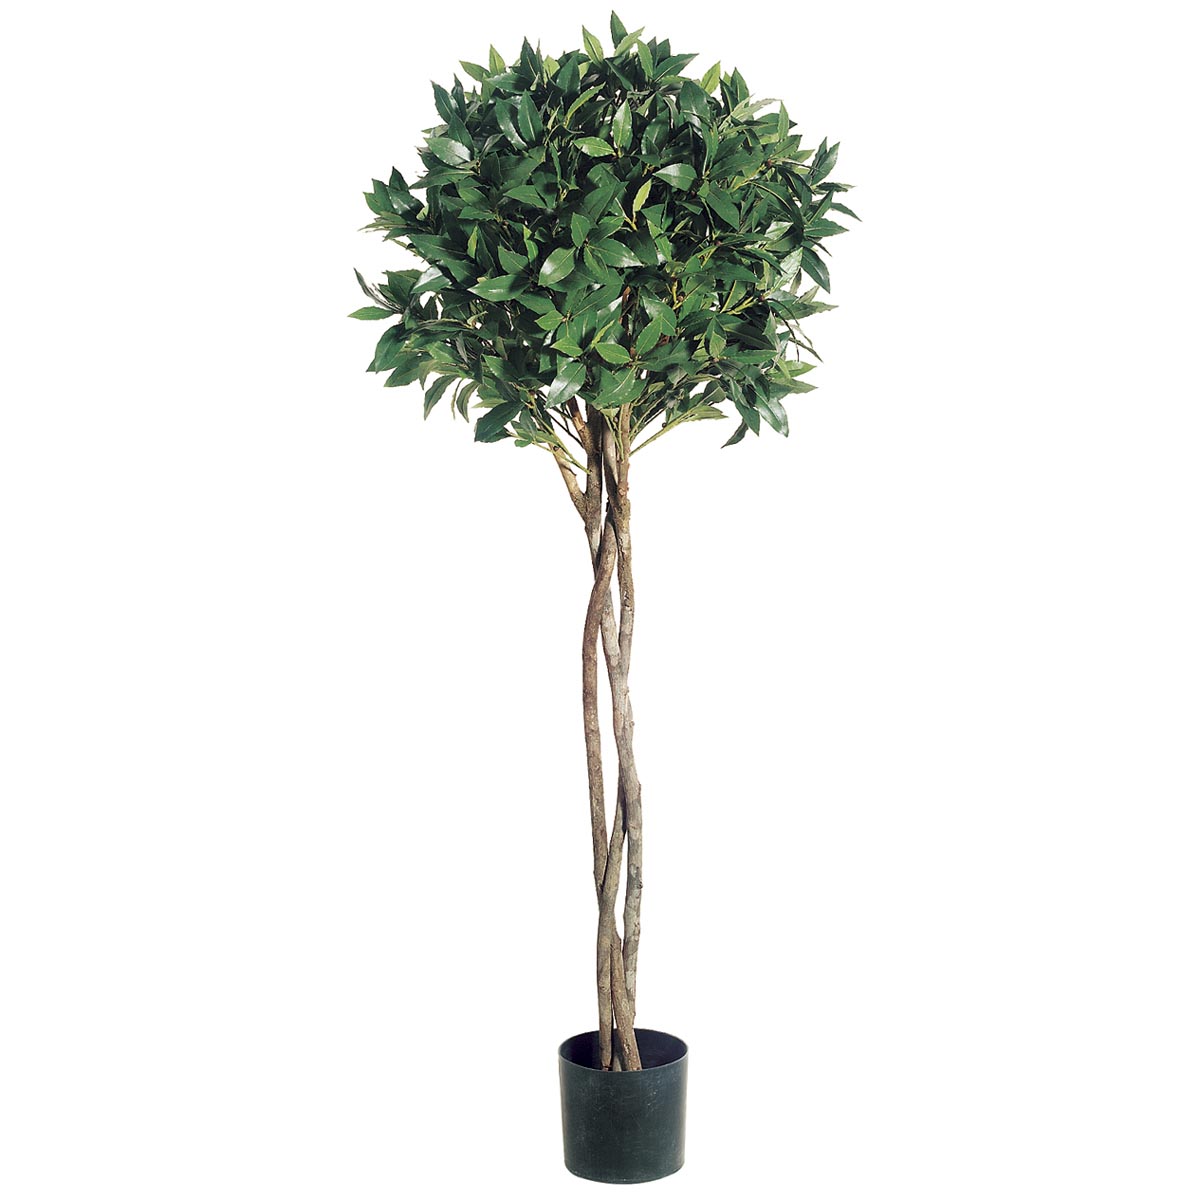 4 Foot Bay Leaf Topiary With Braided Trunk: Limited Uv (set Of 2)